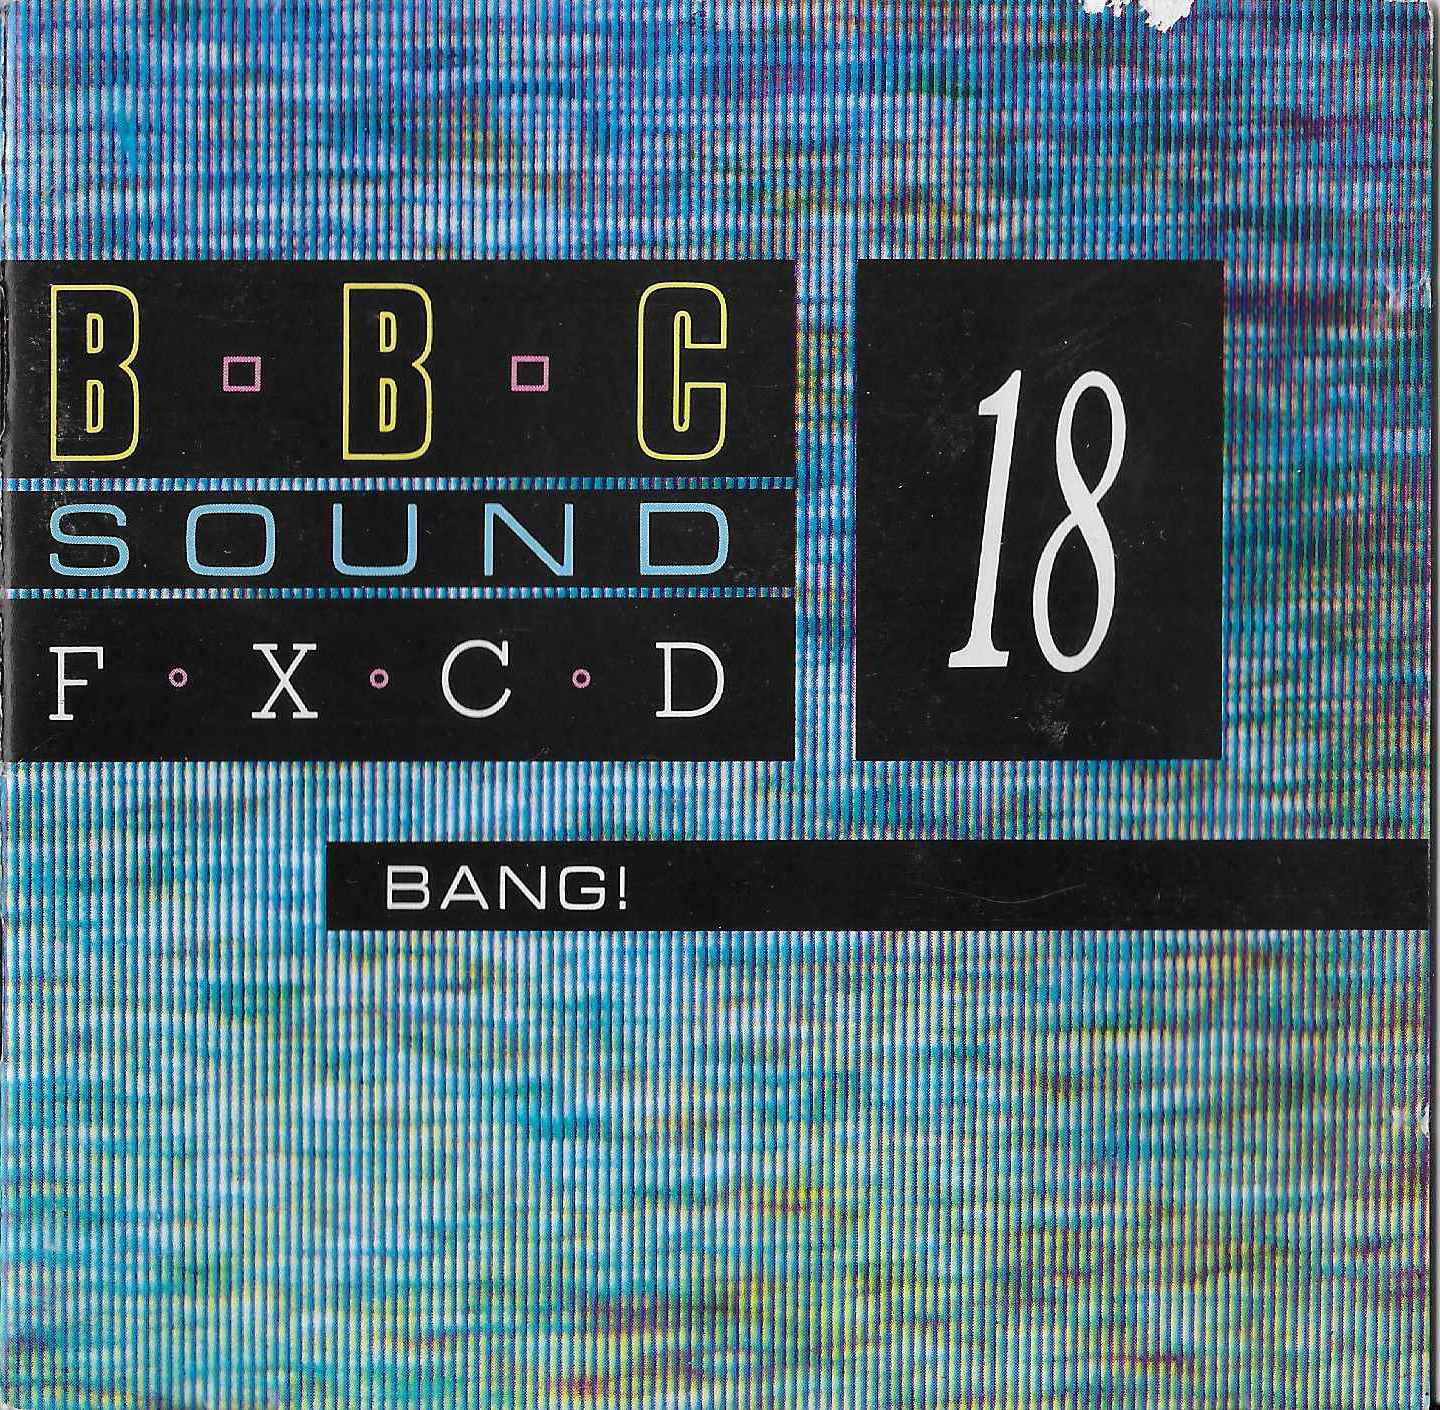 Picture of BBCCD SFX018 Bang ! by artist Various from the BBC cds - Records and Tapes library